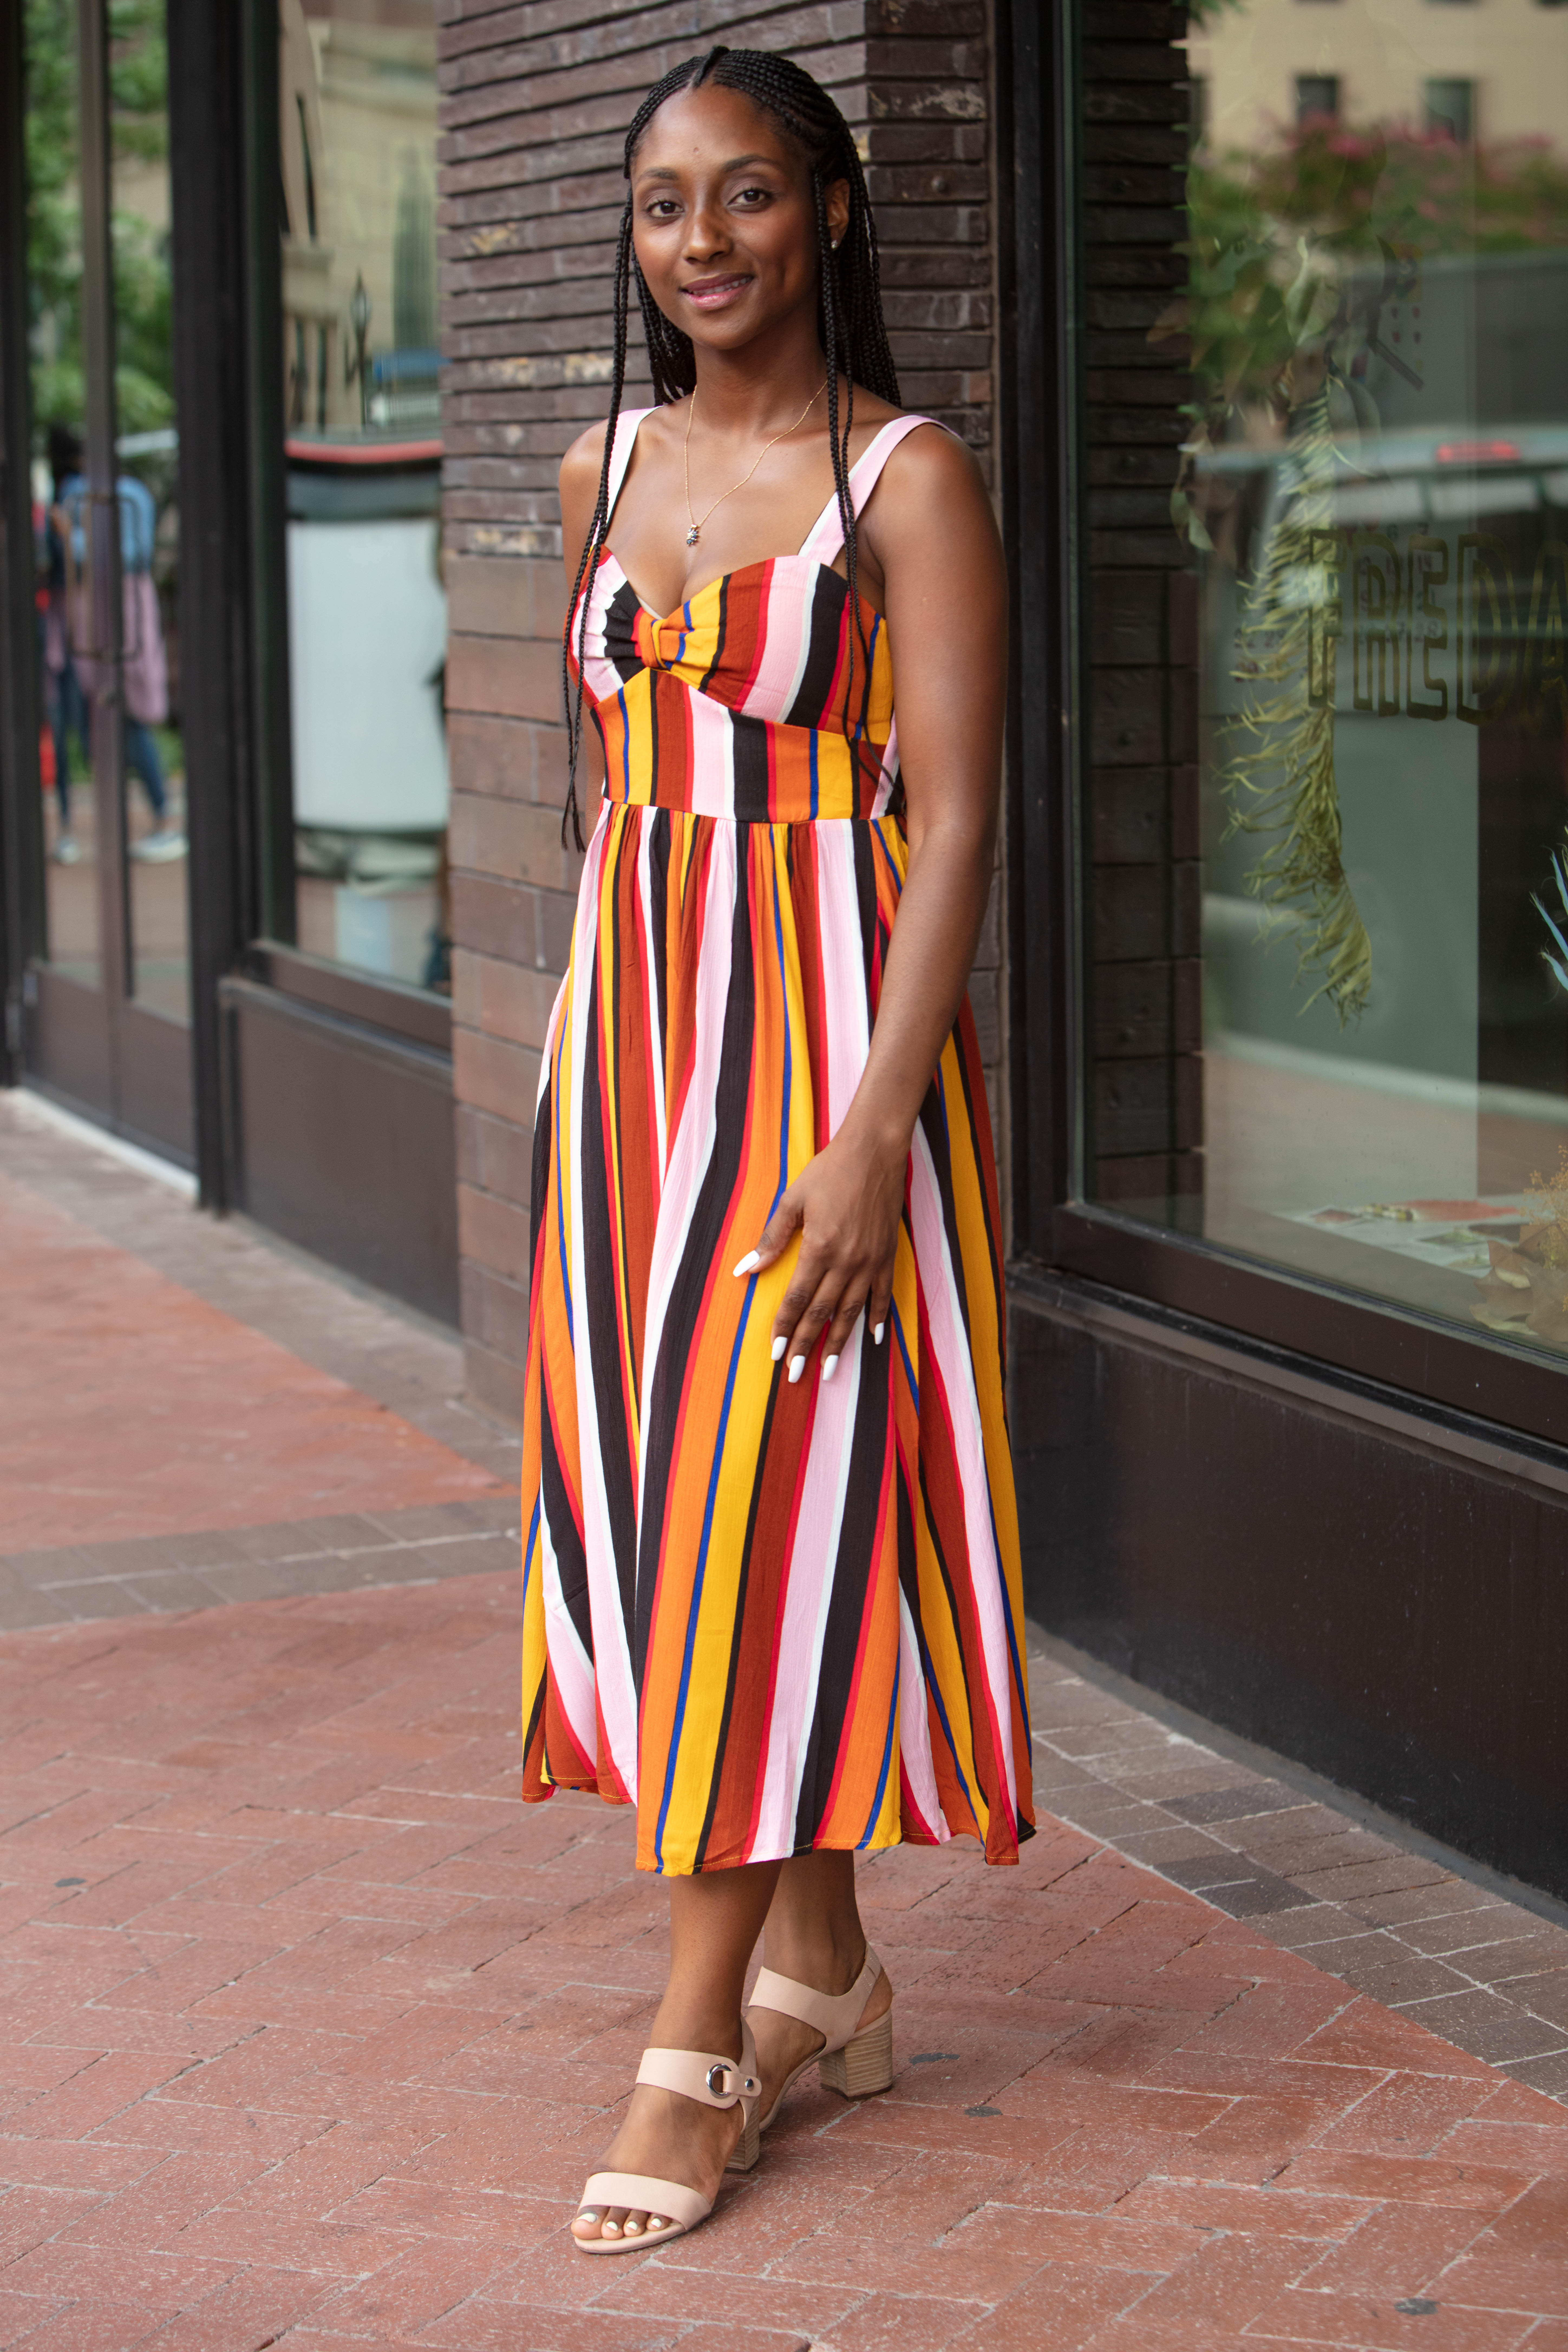 Behold, The Hottest Street Style Looks At ESSENCE Festival 2018
